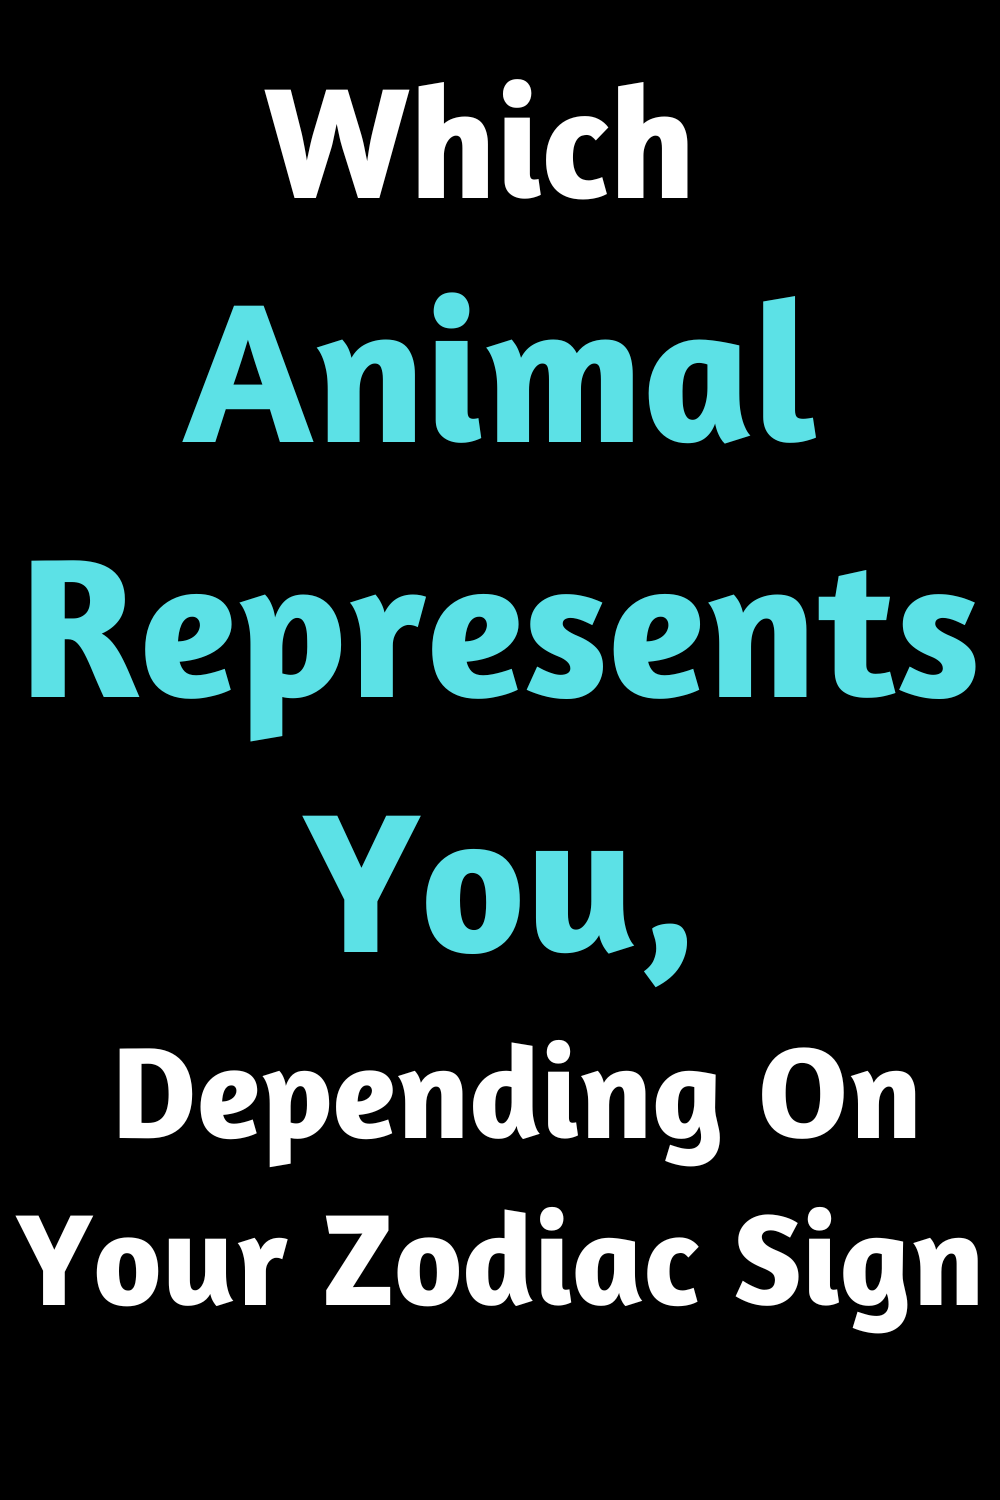 Which Animal Represents You, Depending On Your Zodiac Sign